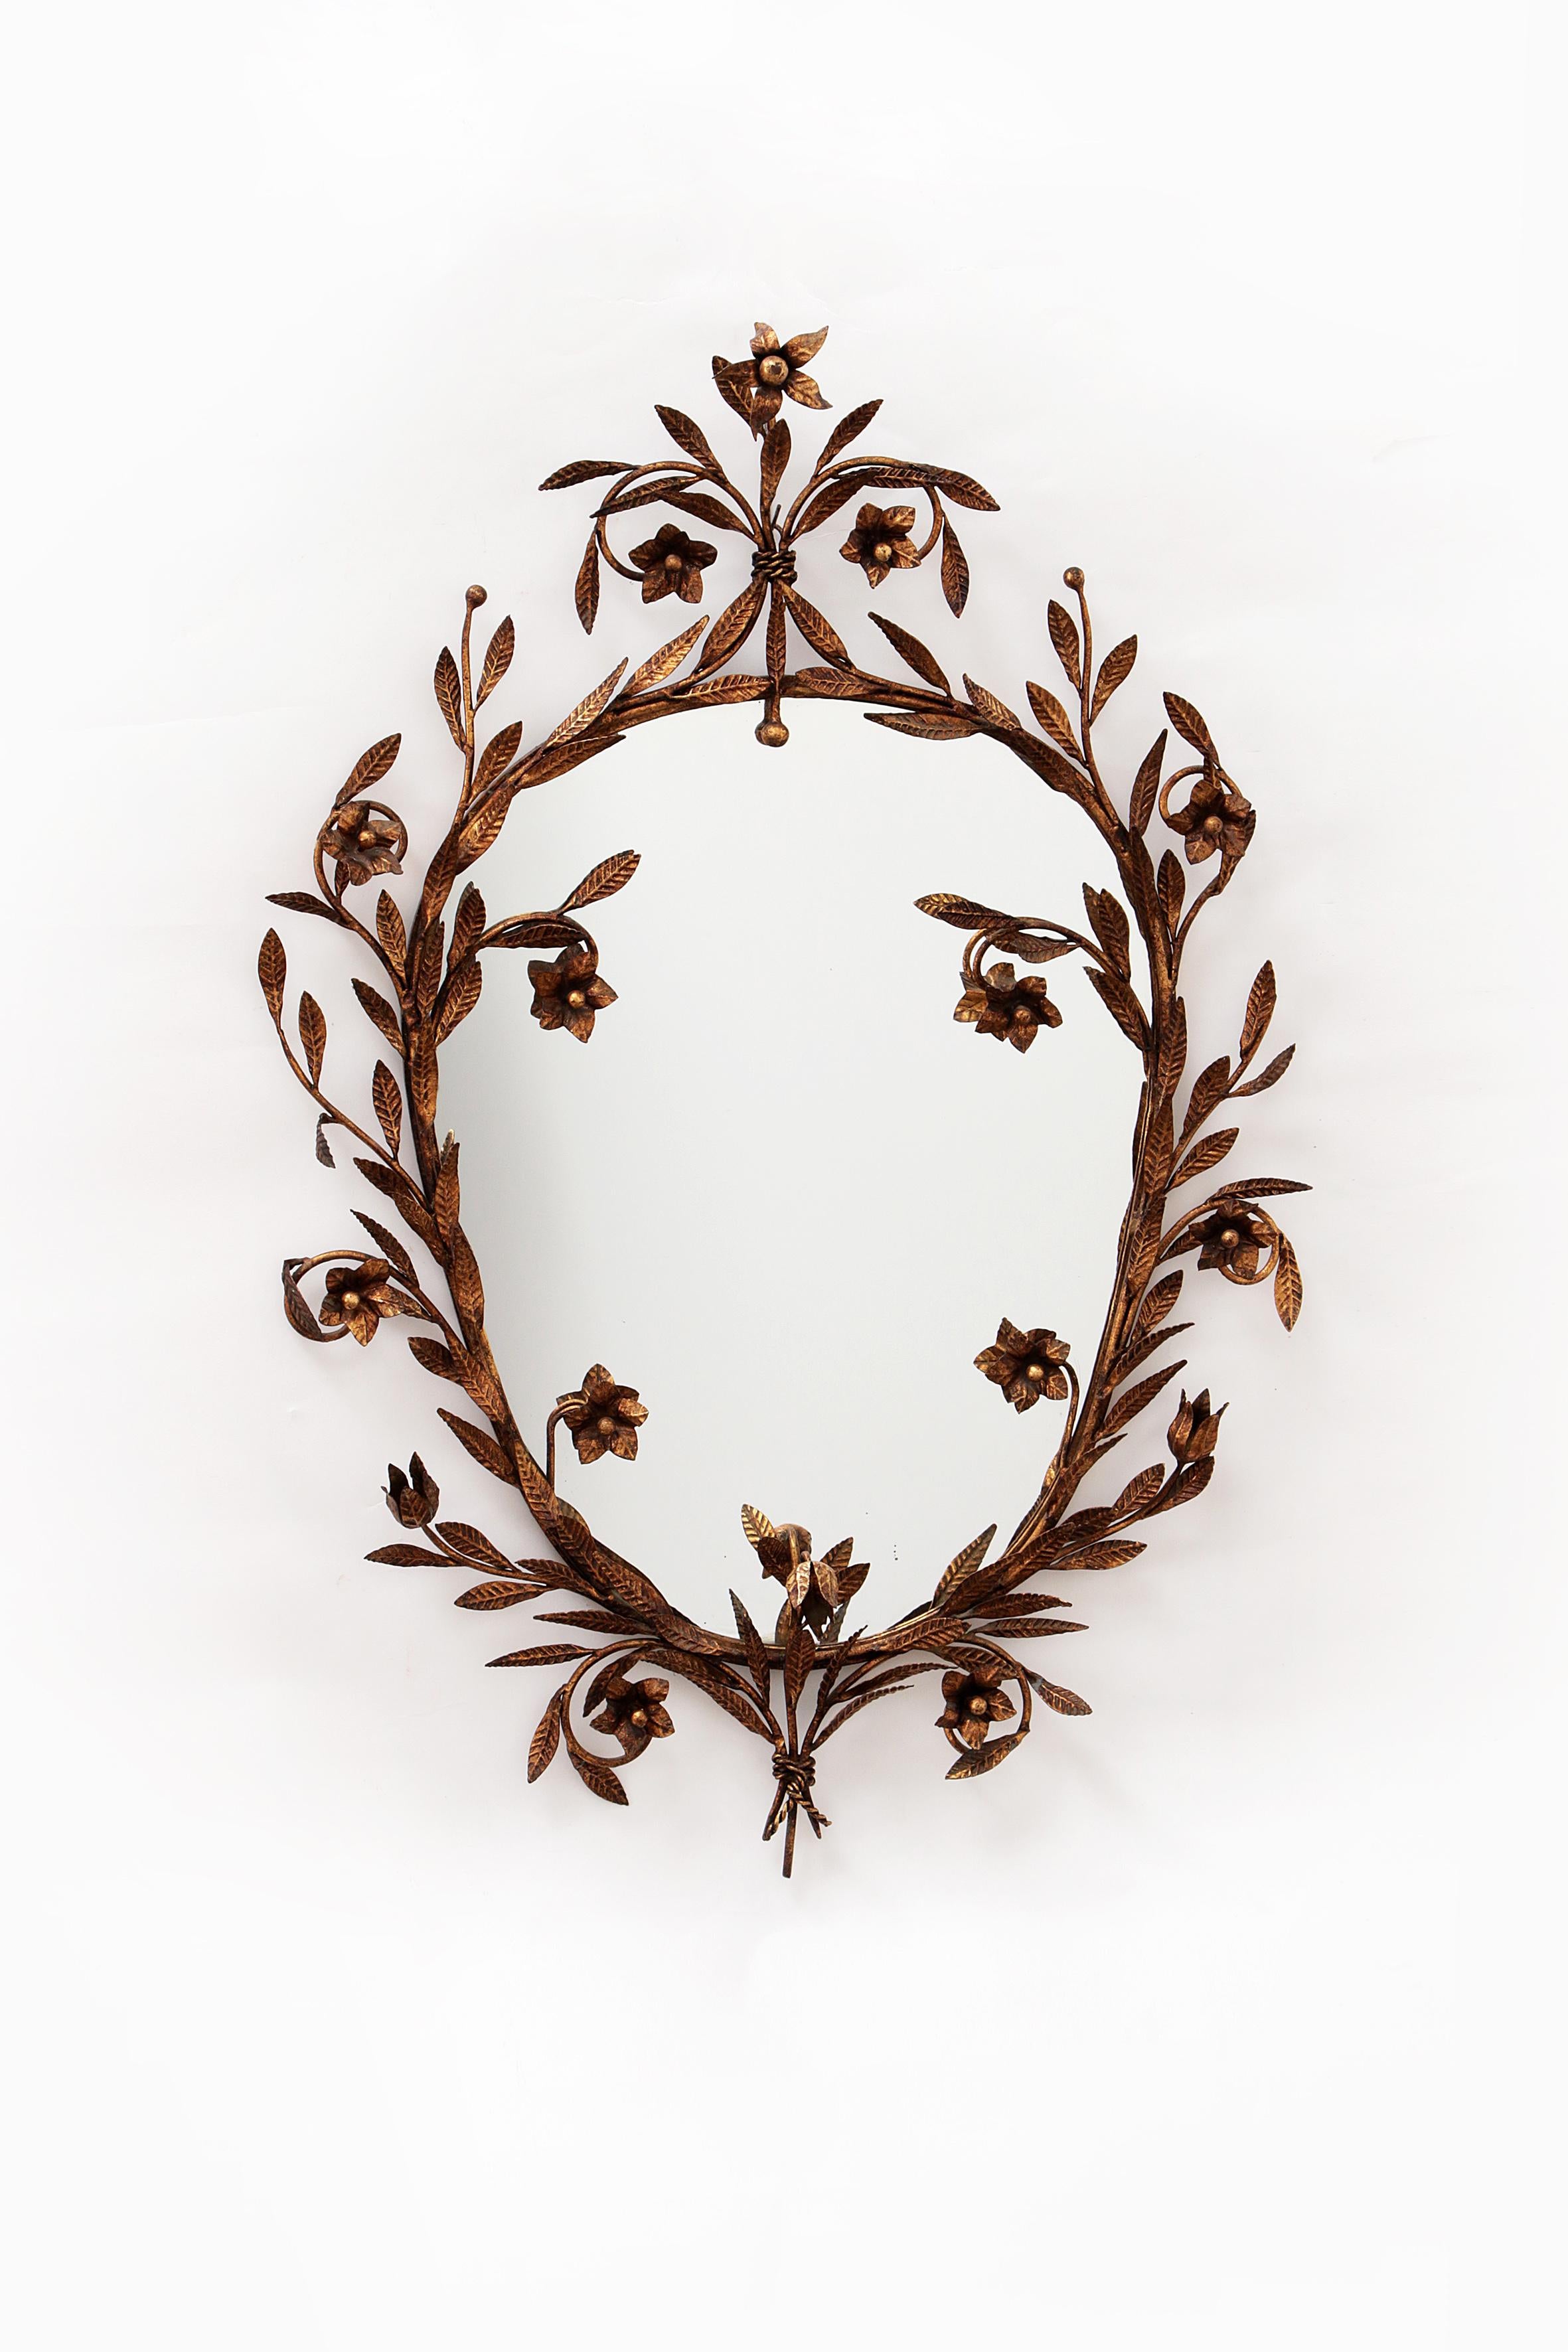 Mid Century Modern Vintage Gold Metal Oval Wall Mirror Flowers Roses 1950 Italy


Mid Century Modern vintage oval wall mirror made of gold-colored metal with flowers and leaves, Italy, 1950s.

Beautiful and graceful frame with flowers and leaves in